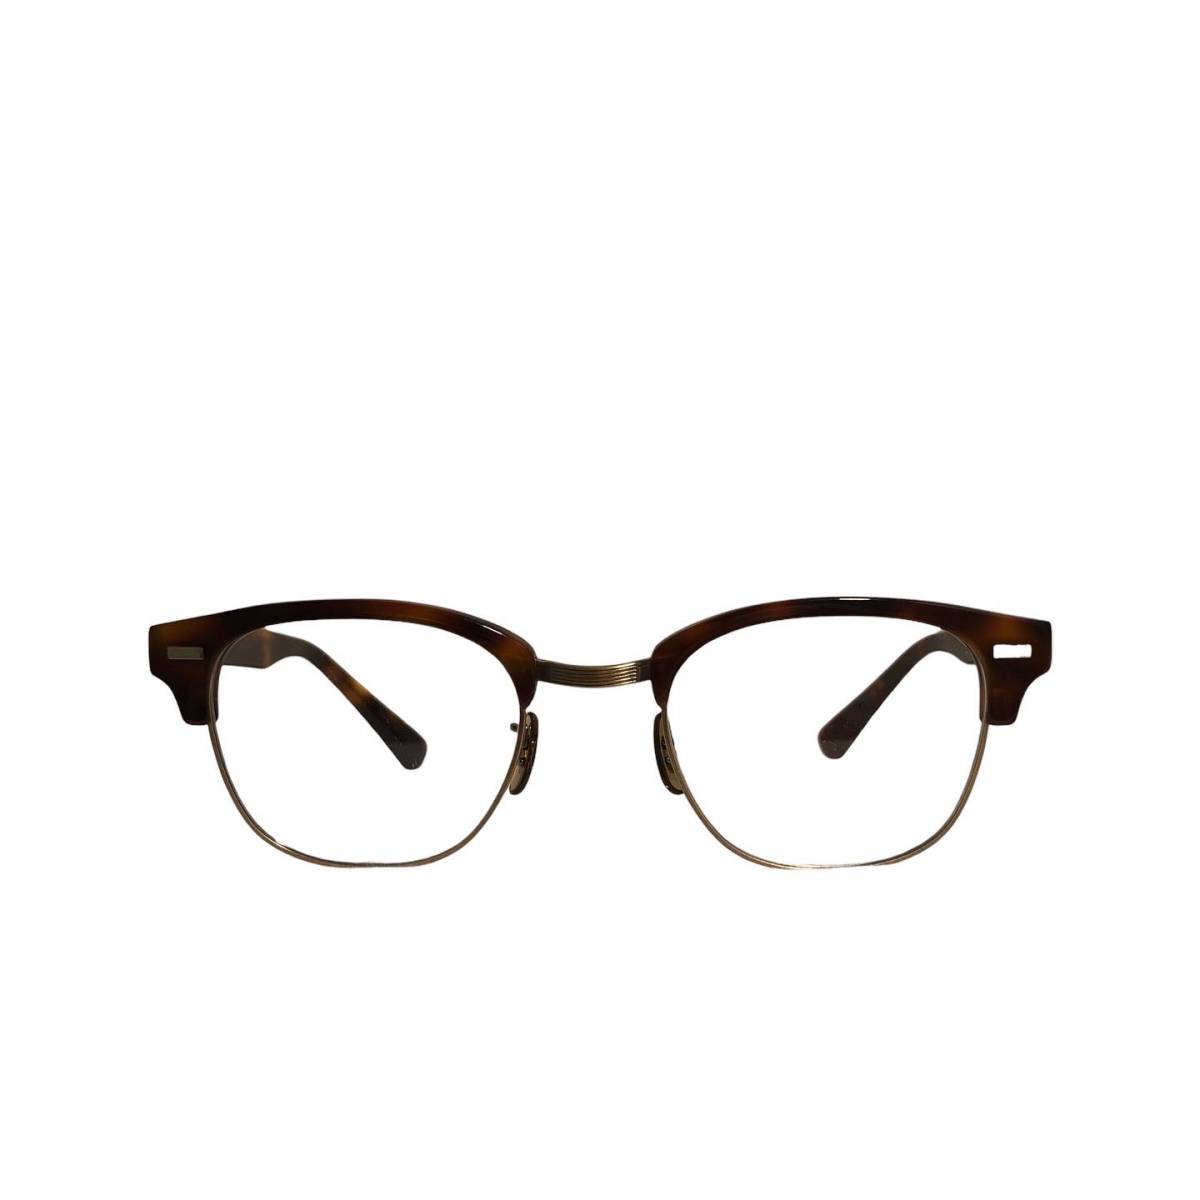 OLIVER PEOPLES balen dm 伊達メガネ ブラウン ケース付き べっ甲